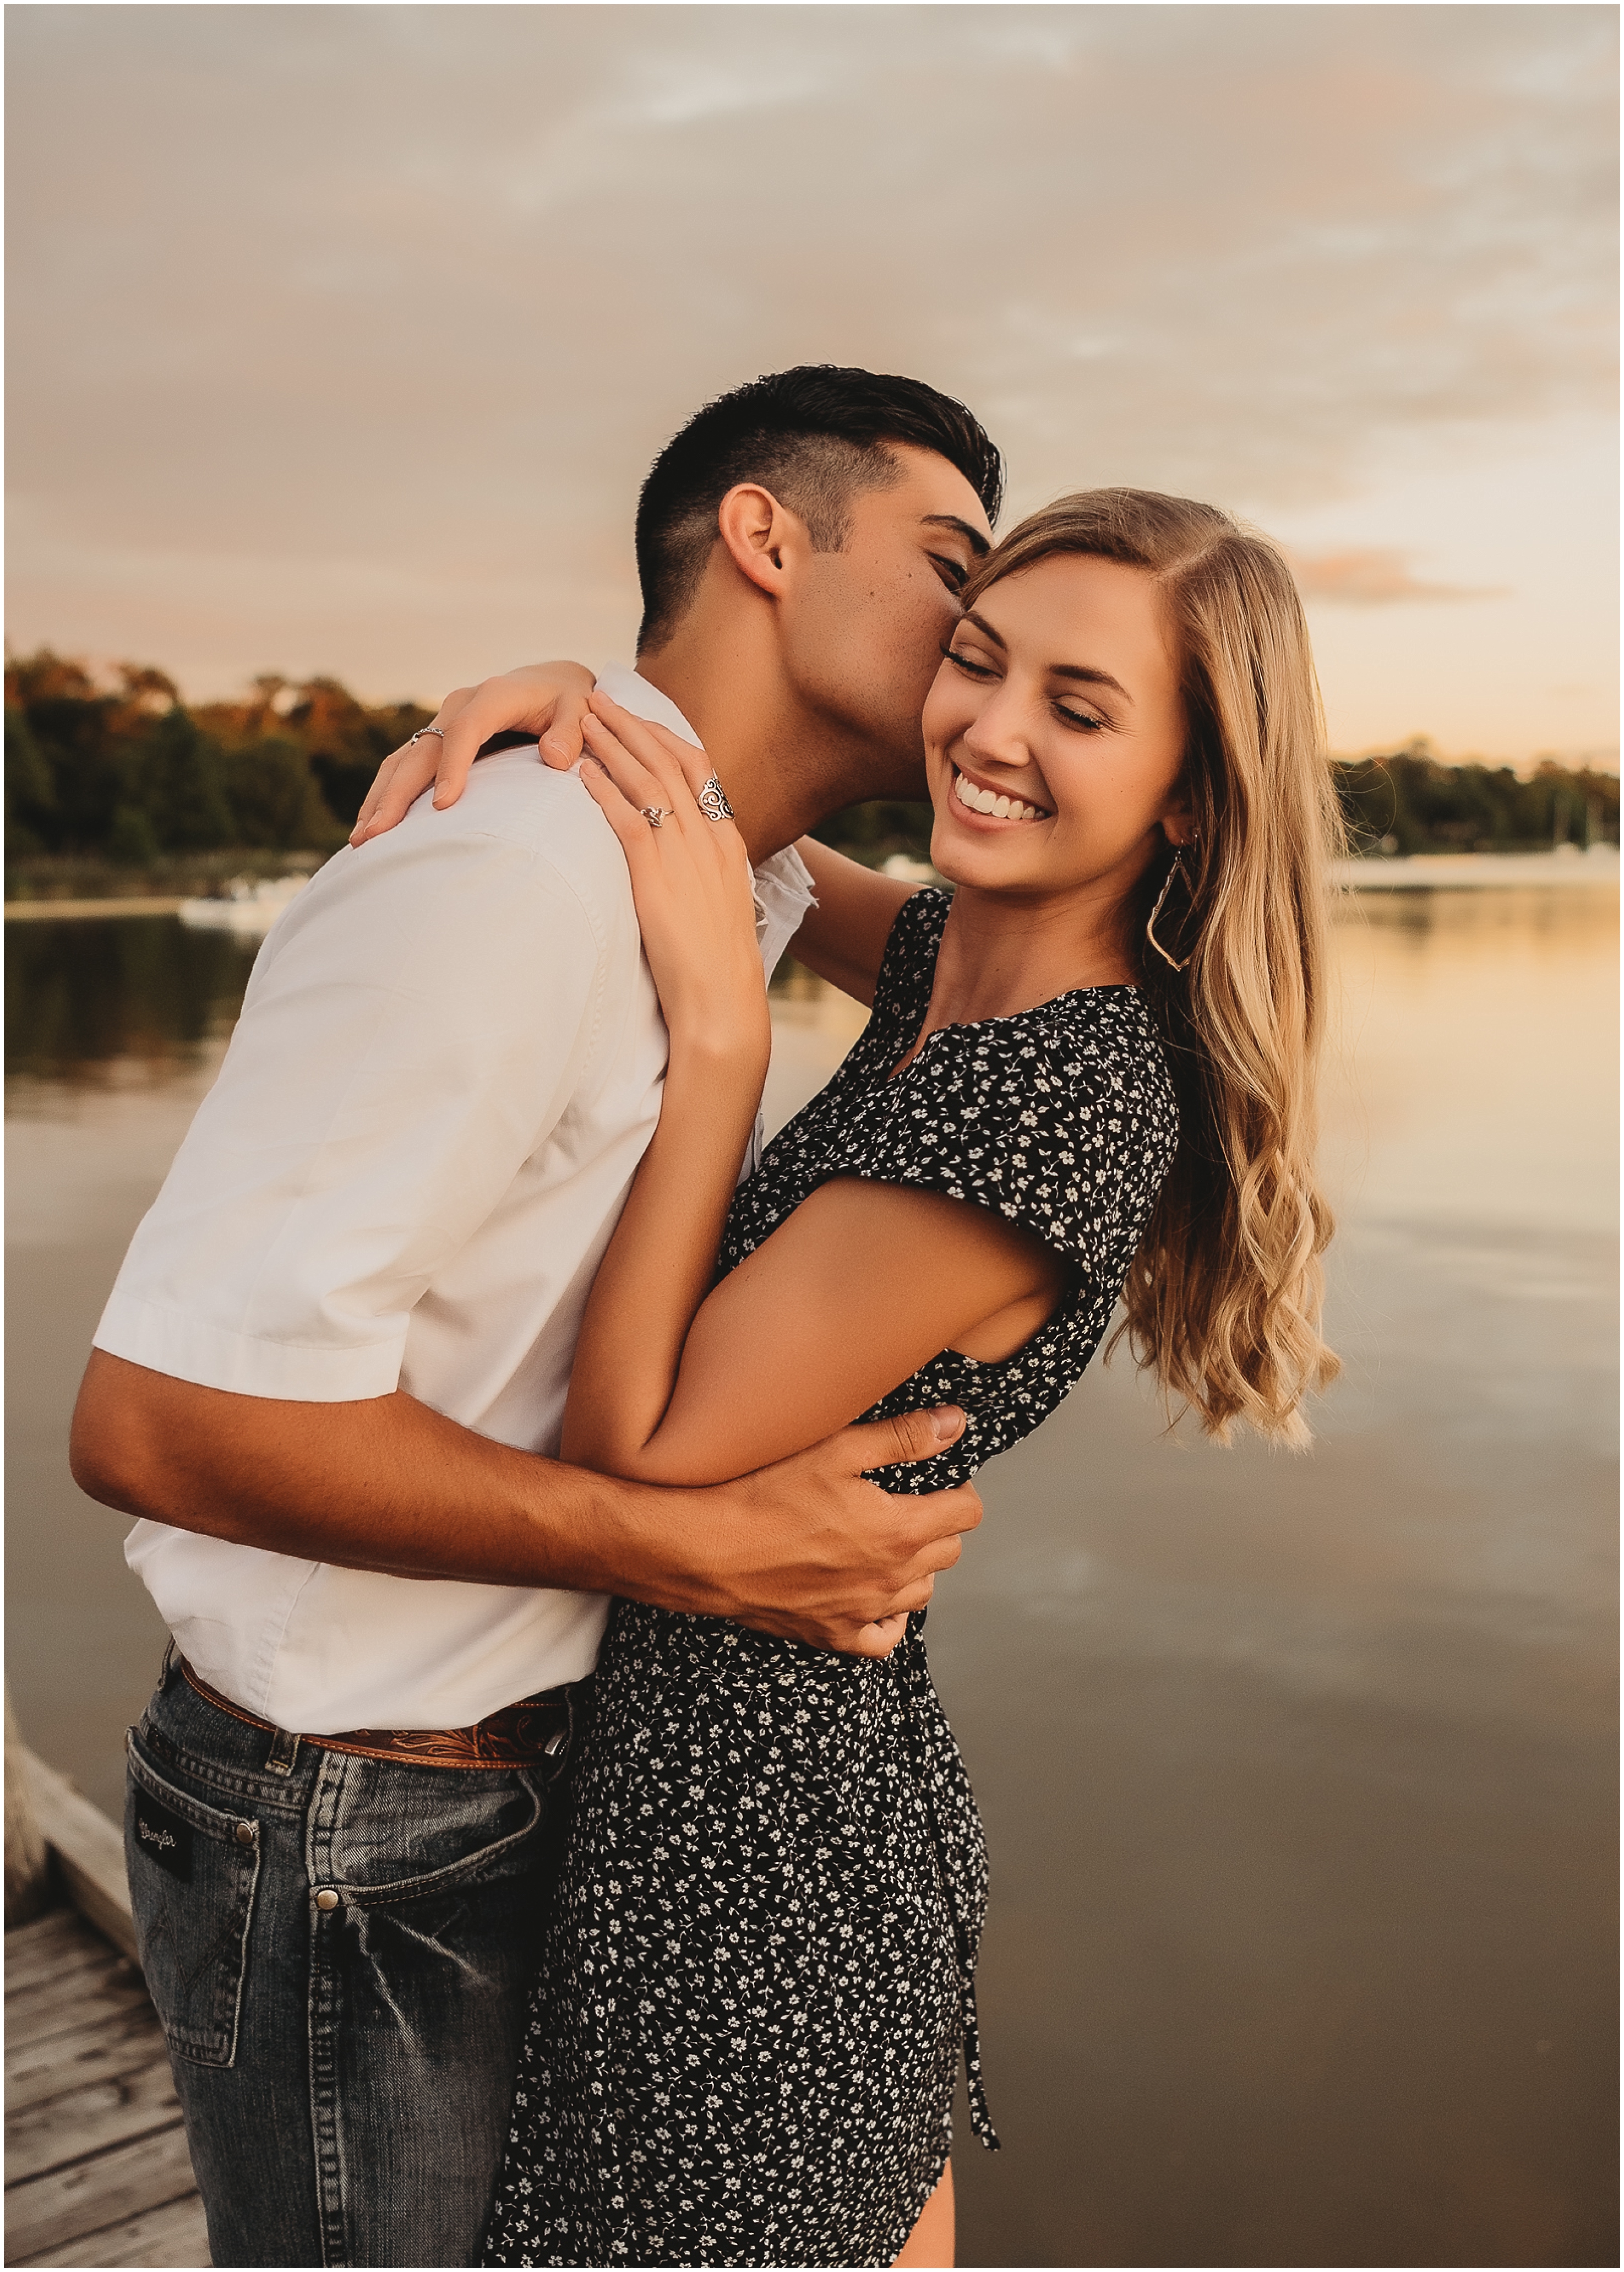 Summer engagement session at White Rock Lake in Dallas, Texas by Dallas Wedding Photographer Kyrsten Ashlay Photography